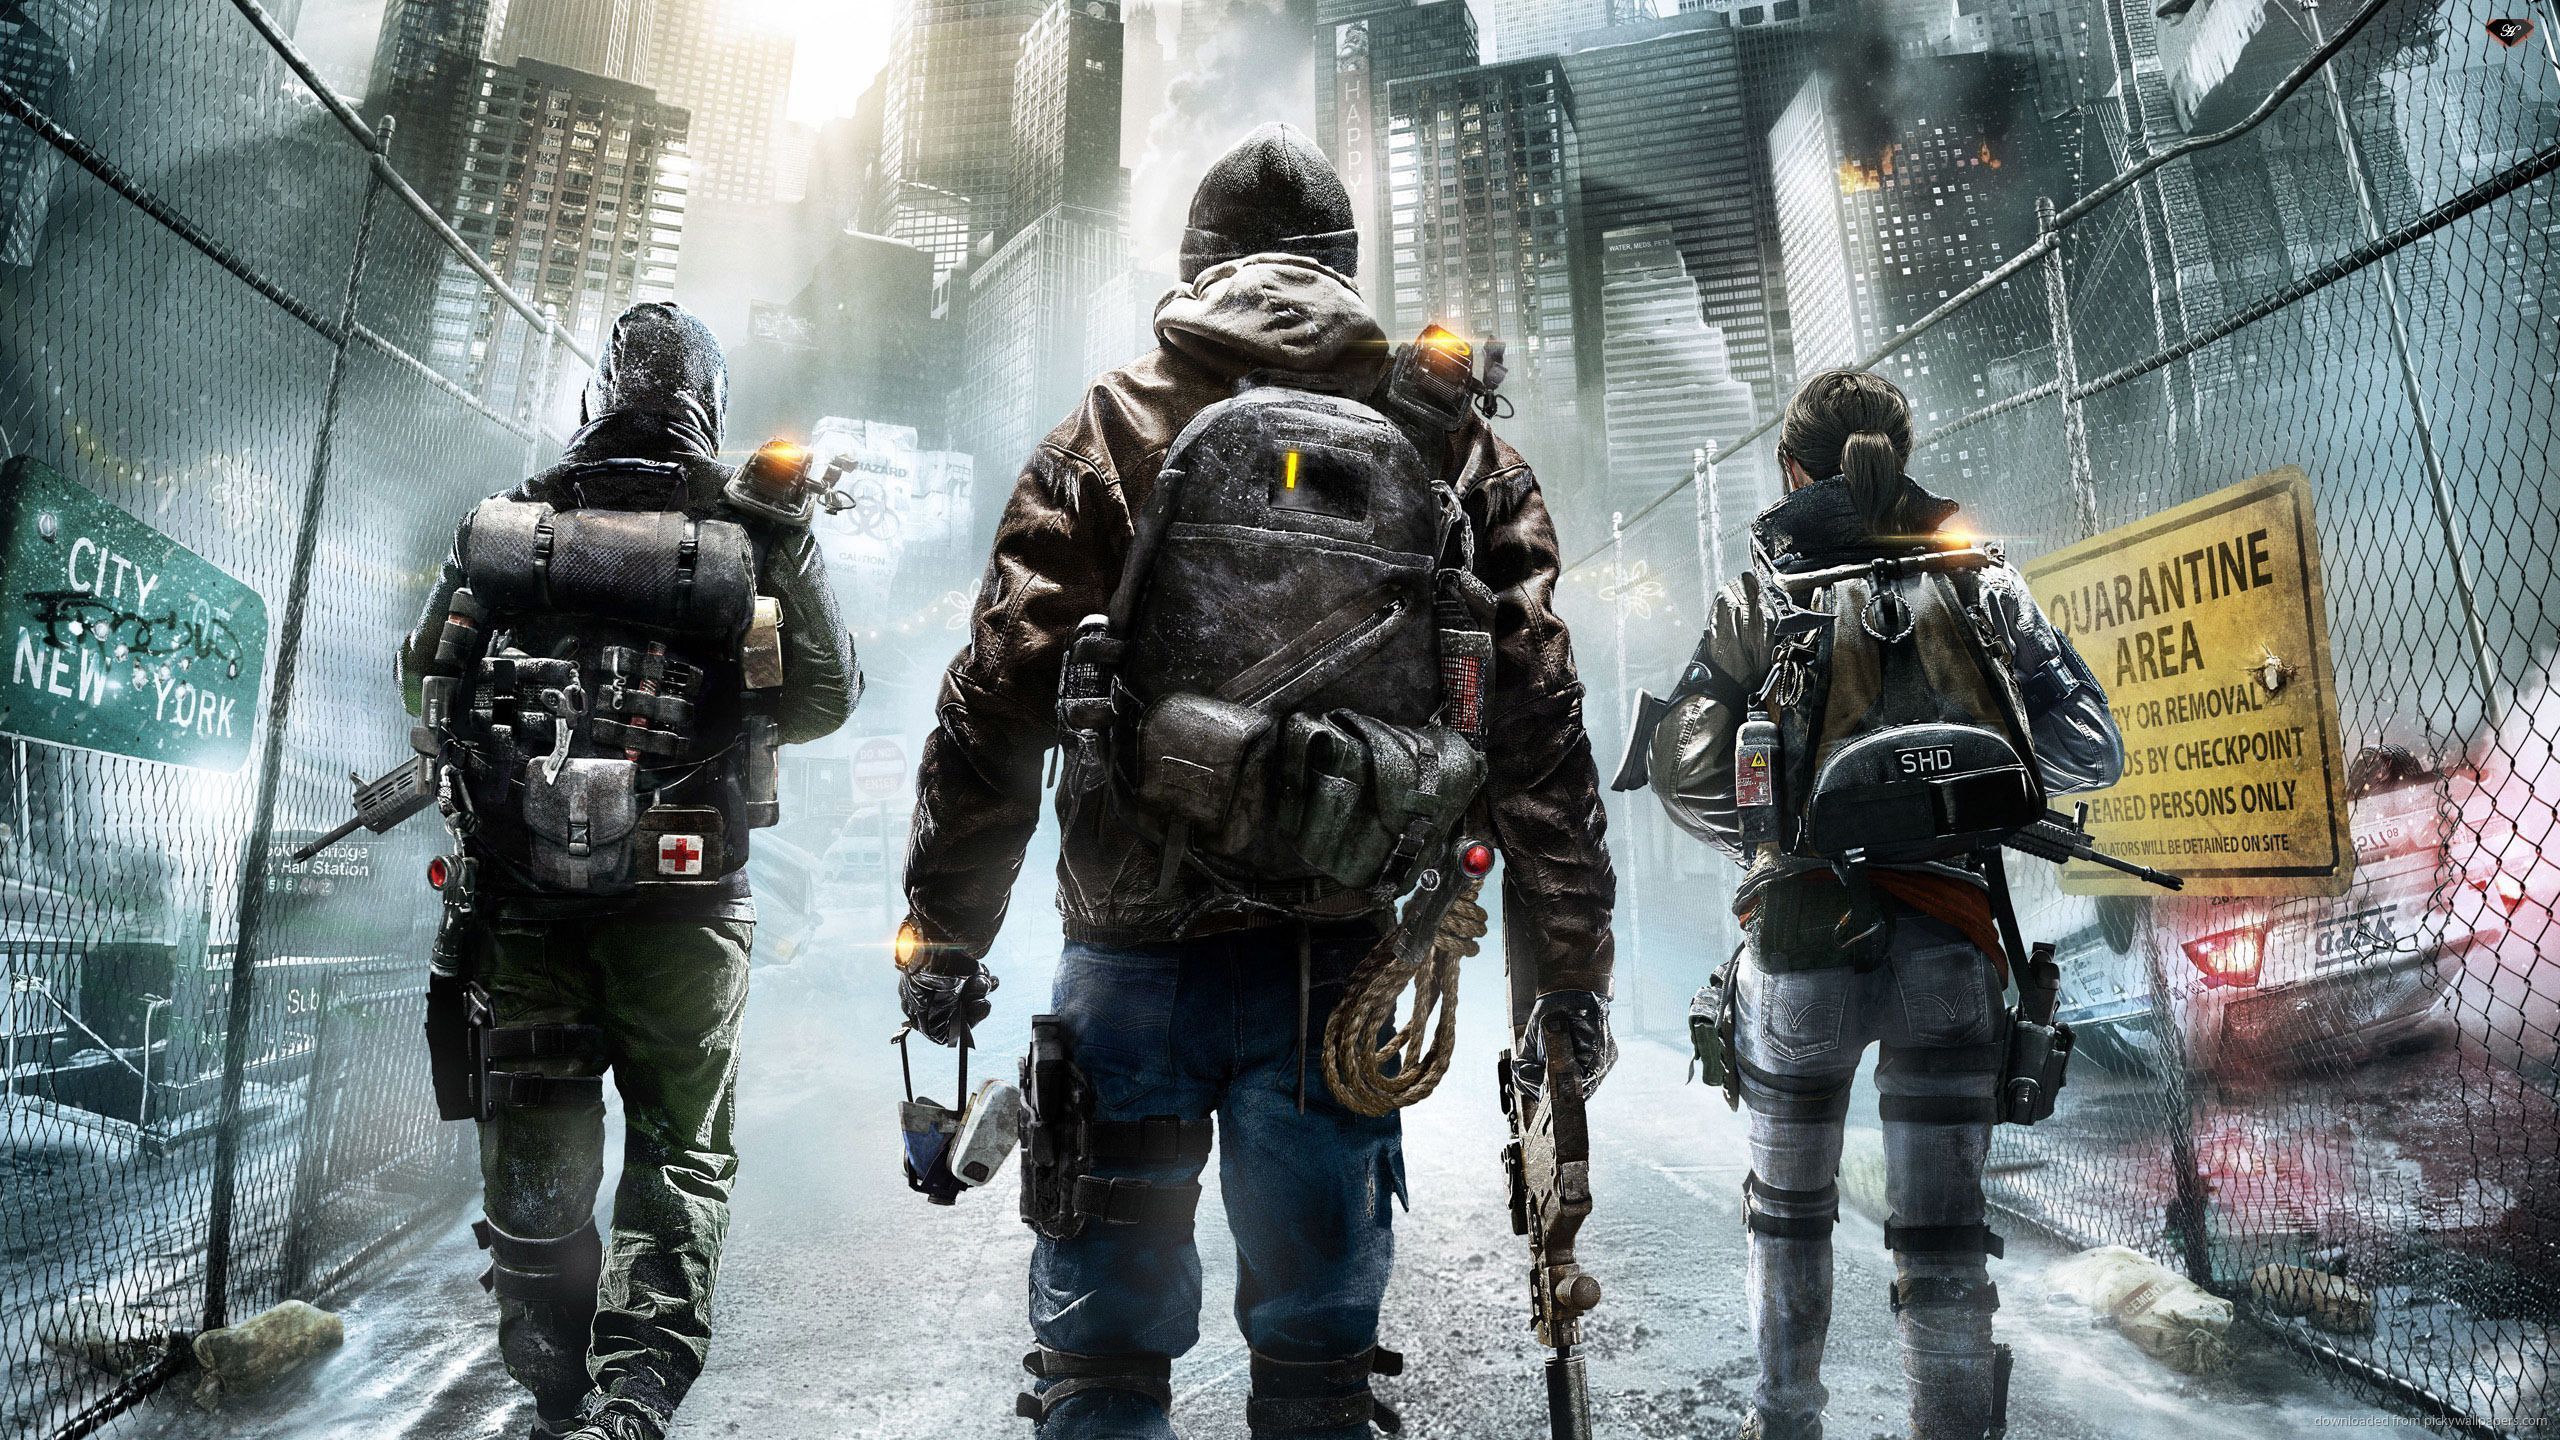 Download 2560x1440 Tom Clancys The Division Video Game Wallpaper ...